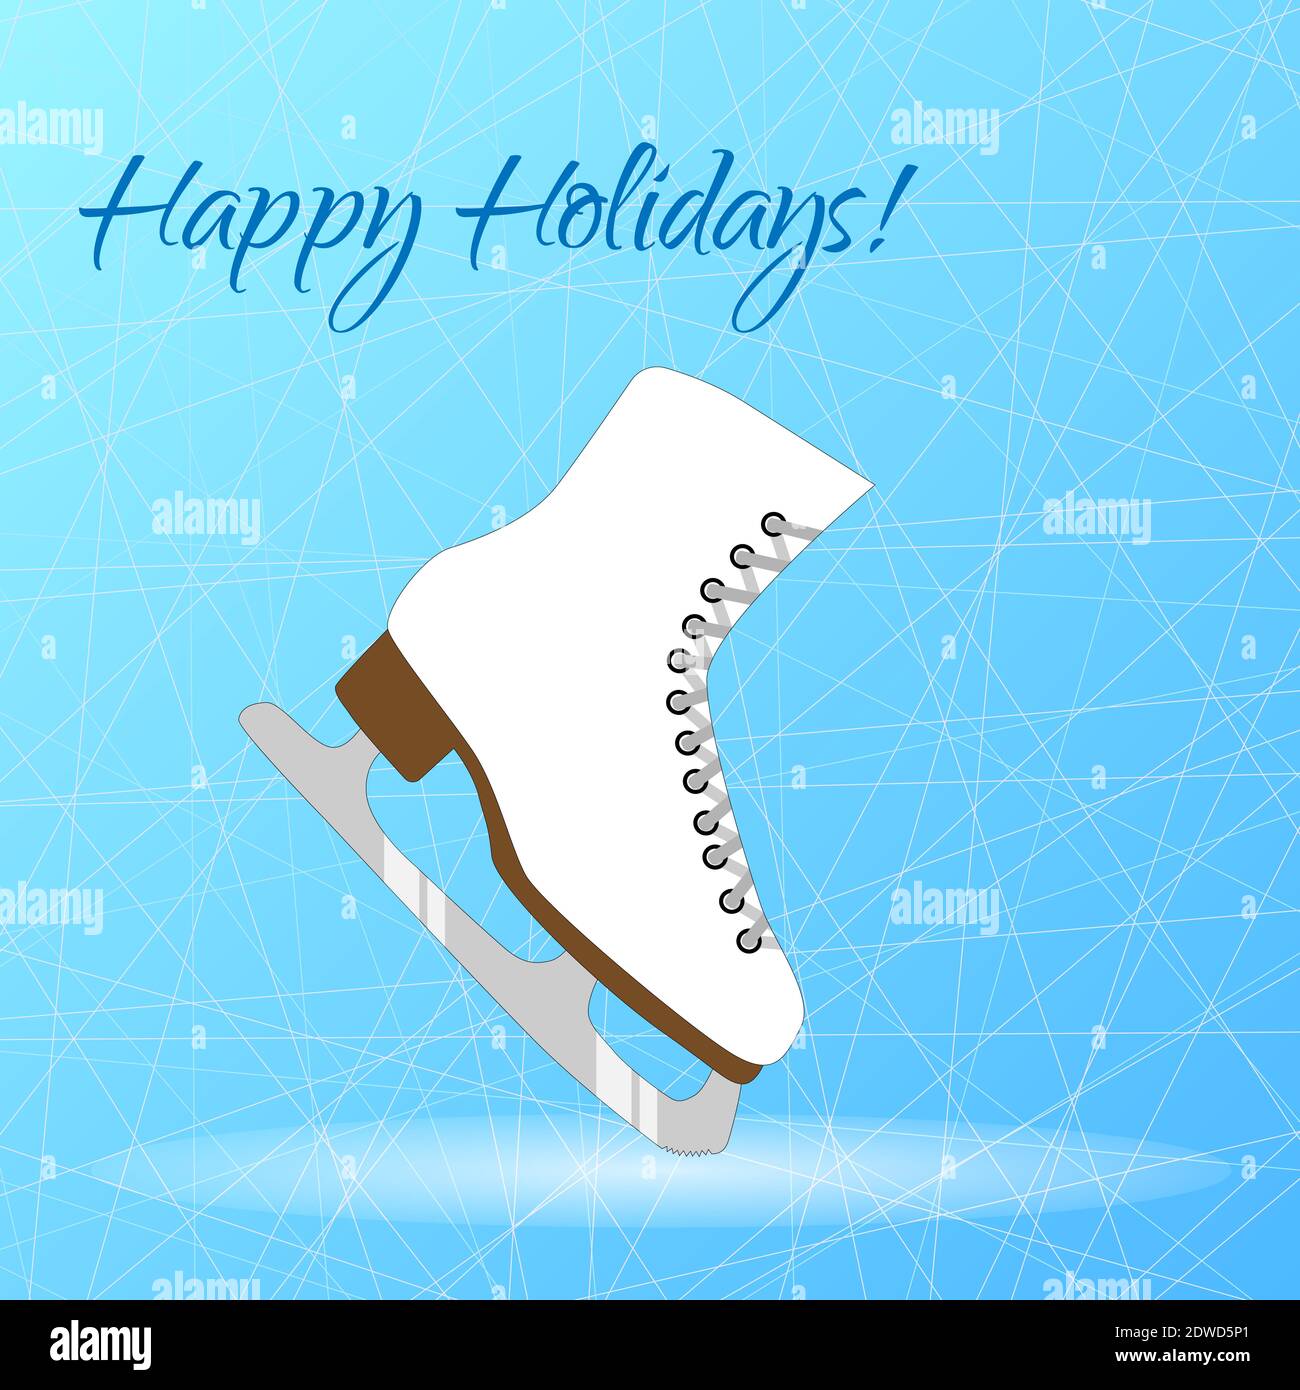 Winter holidays card with figure skates. Winter background with snowflakes. Winter sport figure skating. New Year or Christmas greeting card, poster. Stock Vector